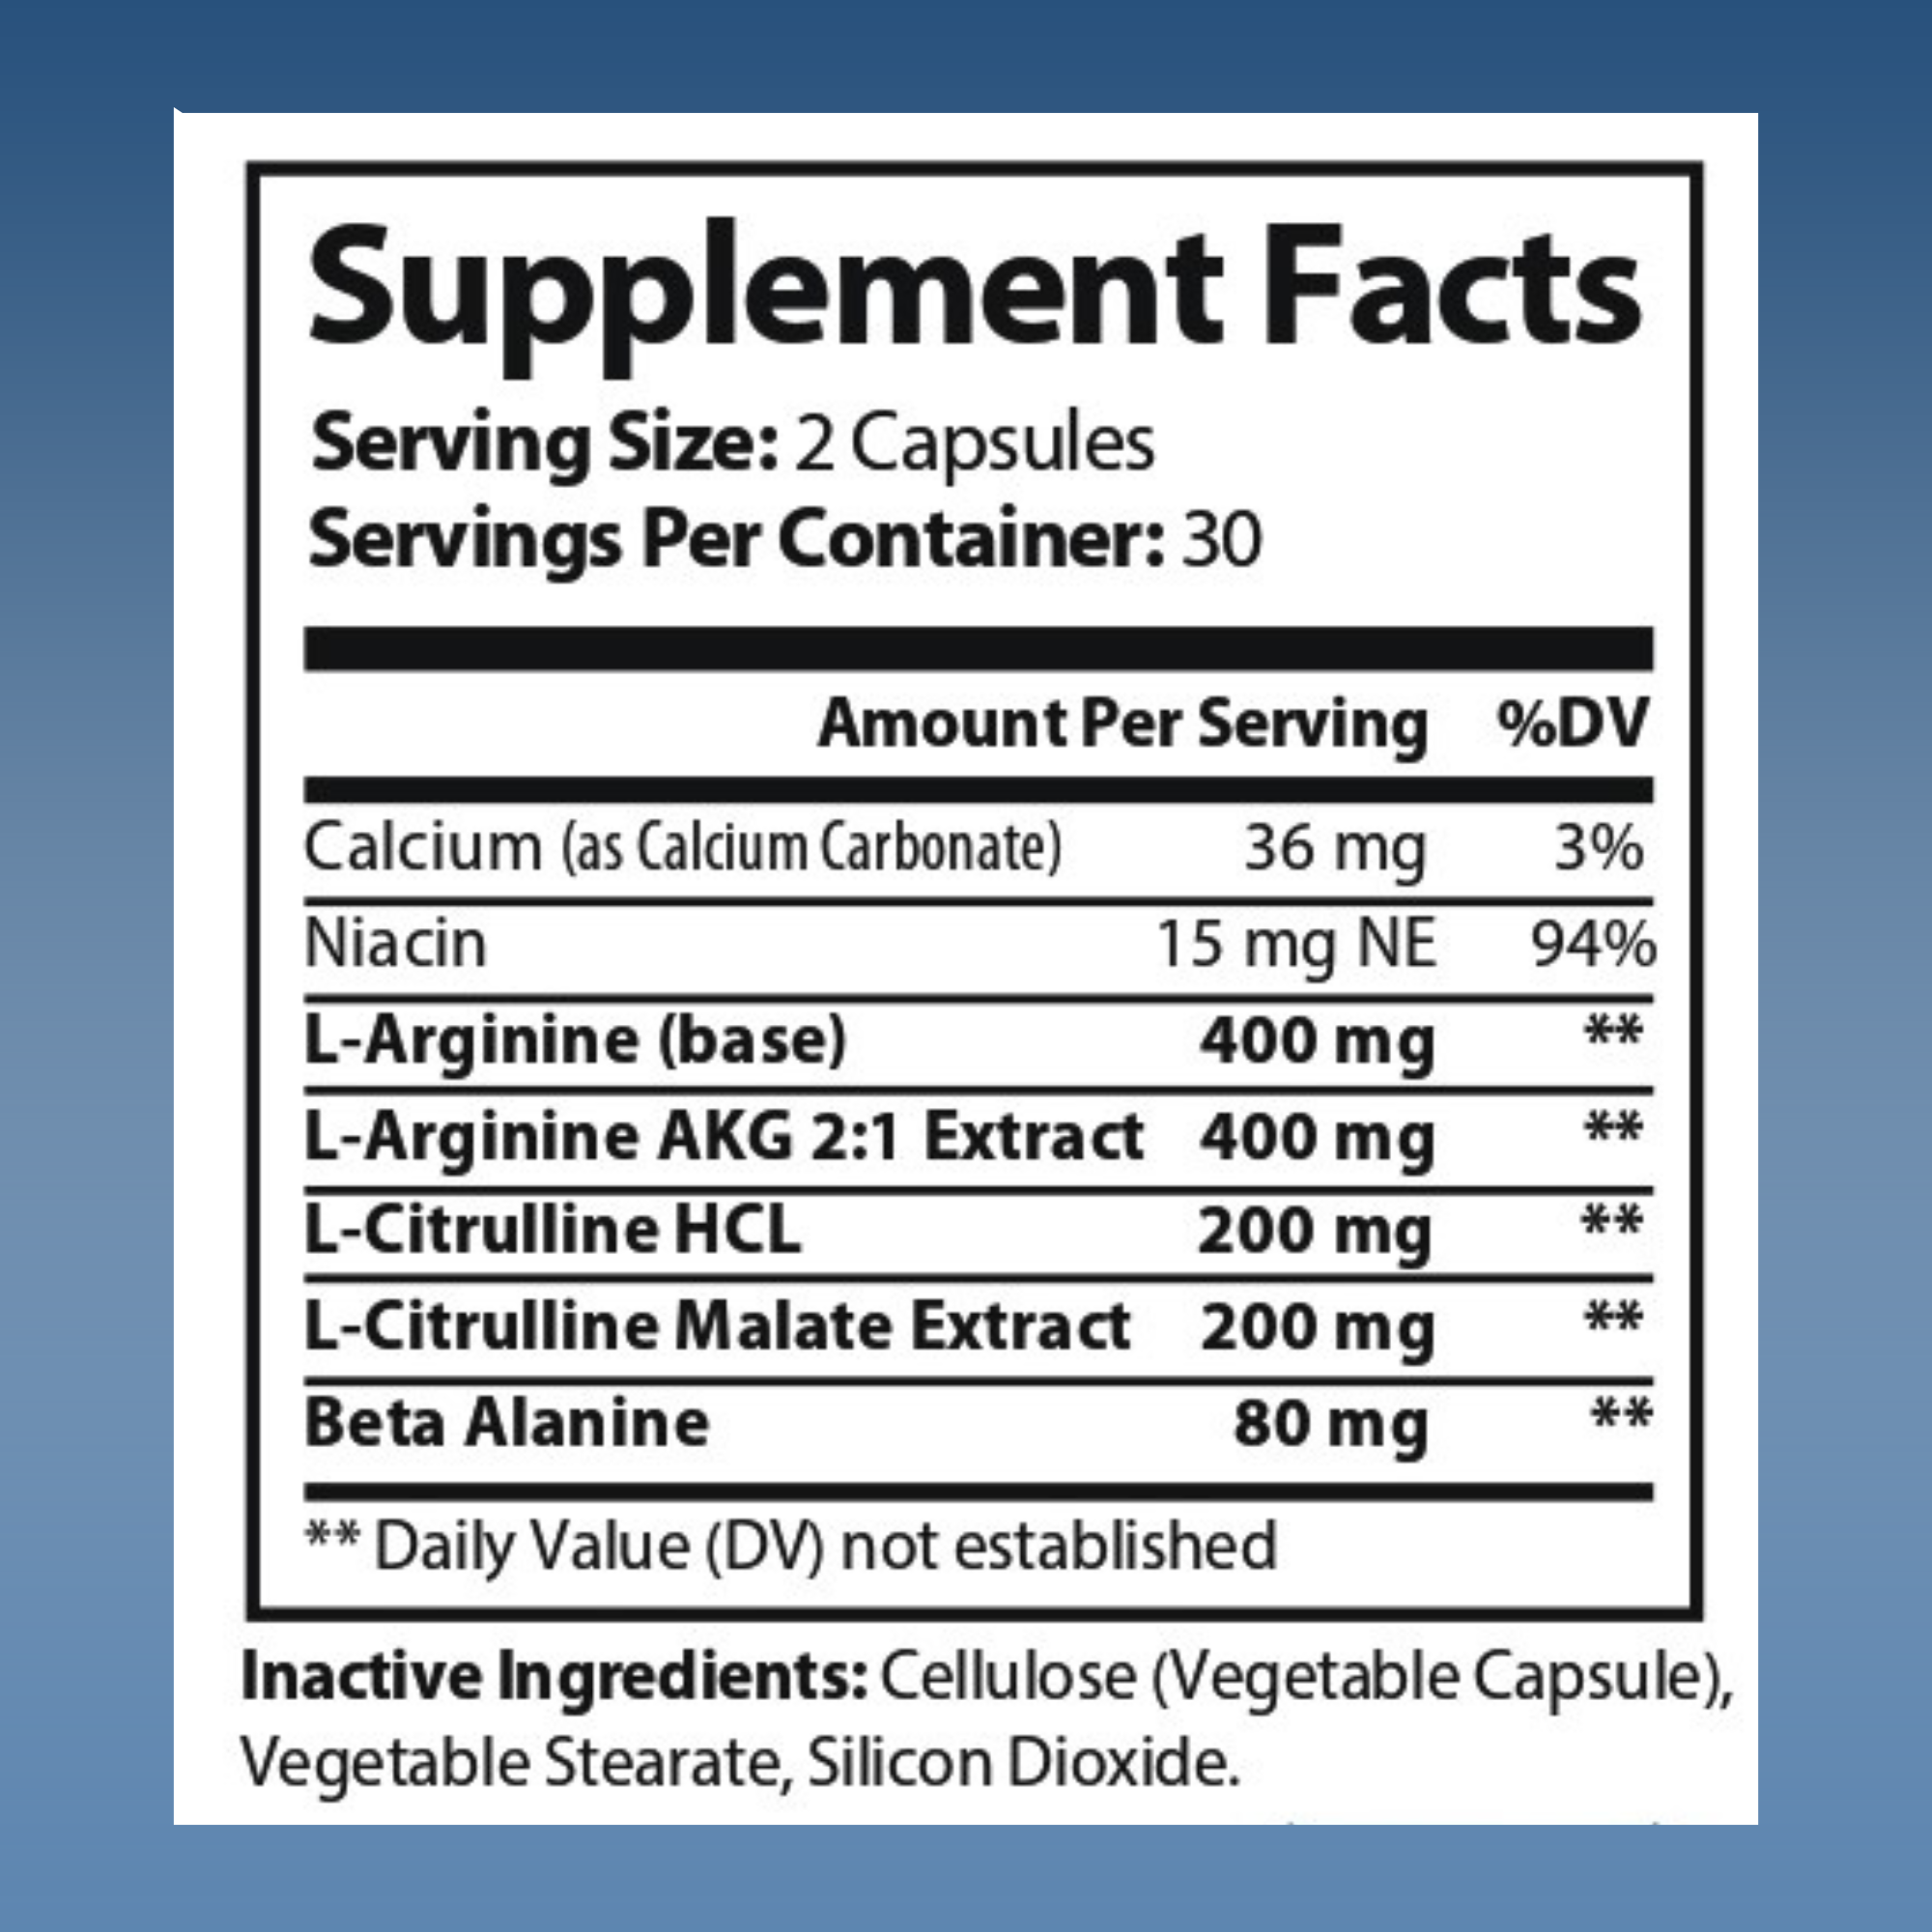 Check Supplement facts for finding the amount per serving of l arginine and l citrulline